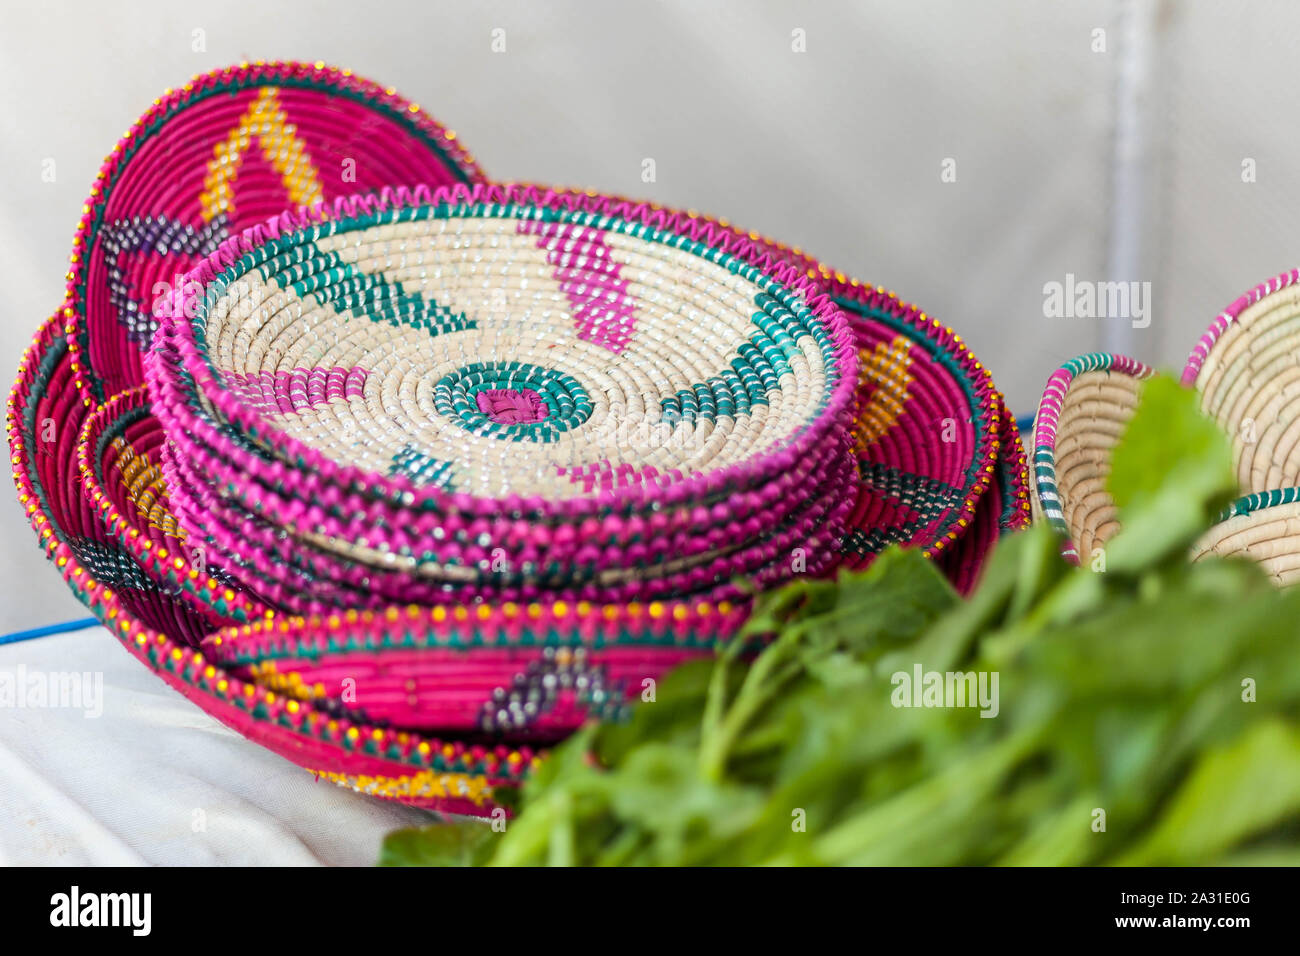 https://c8.alamy.com/comp/2A31E0G/changair-chapati-serving-plate-sindhi-handicraft-multi-color-changair-breadben-is-pakistani-traditional-household-handicrafts-used-for-chapti-2A31E0G.jpg